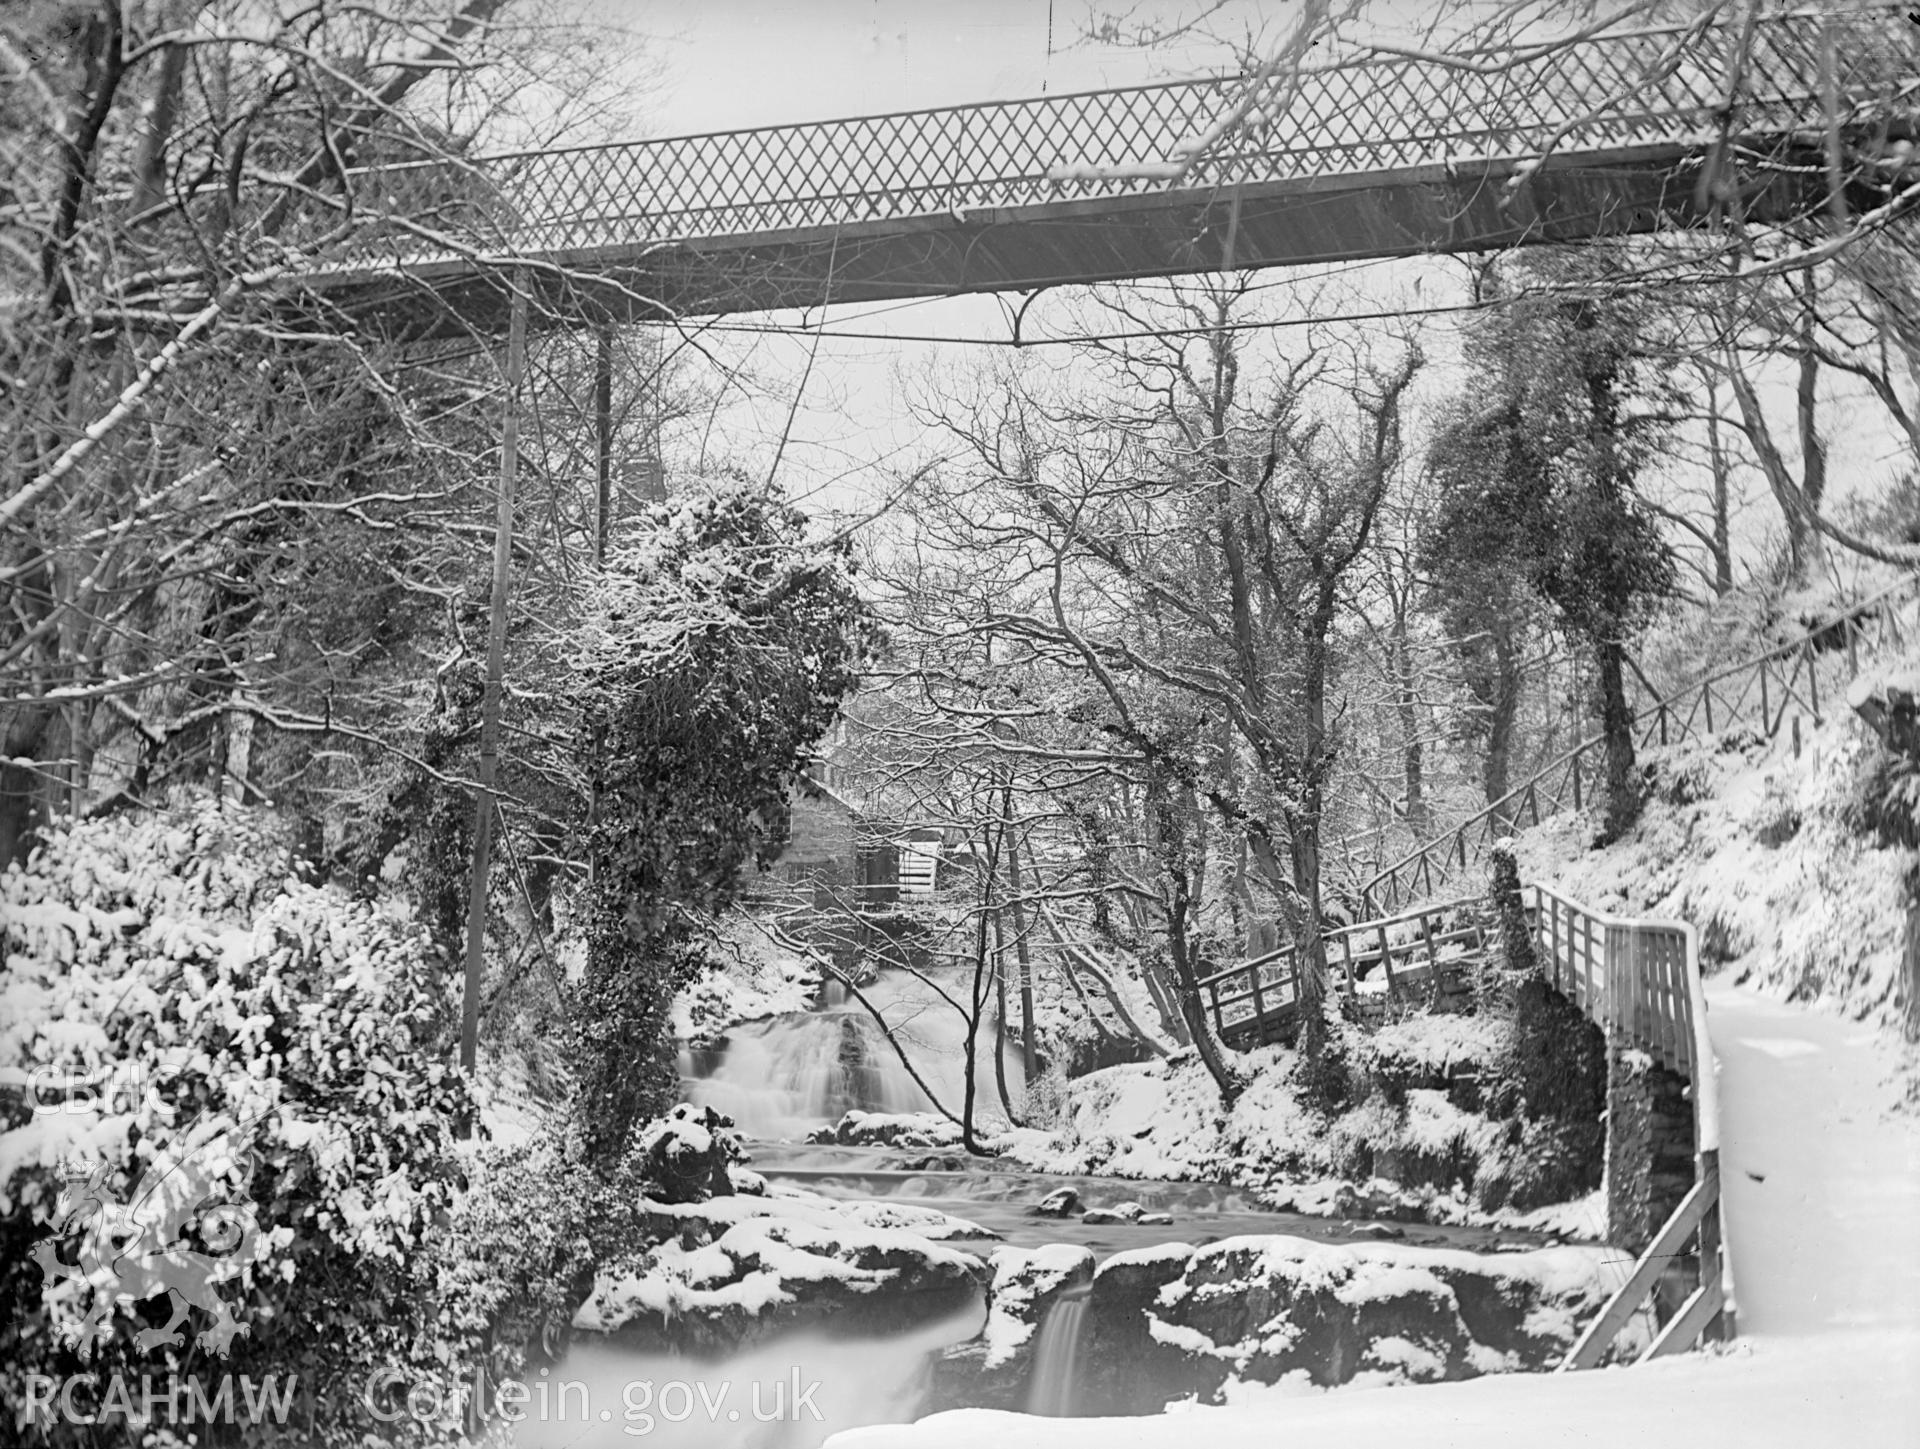 Digital copy of a glass plate showing view of bridge over the falls in the Fairy Glen at Trefriw, taken by Manchester-based amateur photographer A. Rothwell, 1890-1910.